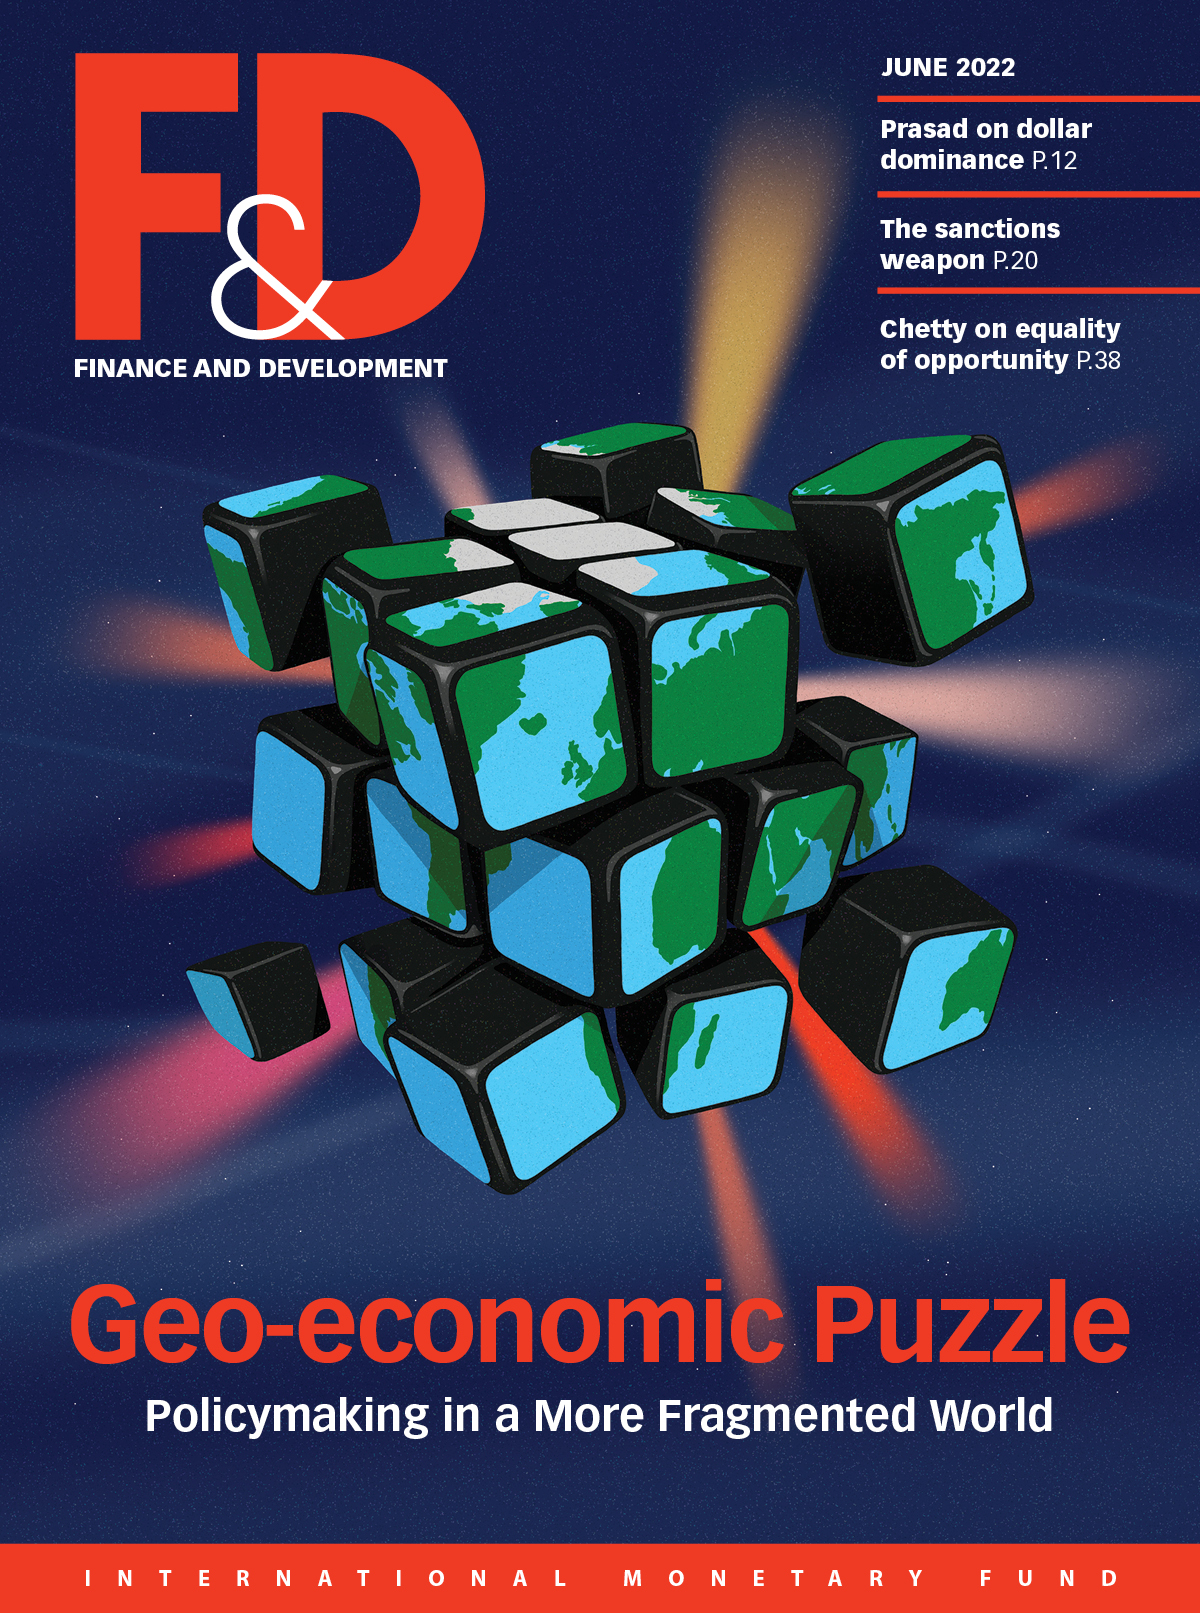 Geo-economic Puzzle: Policymaking in a More Fragmented World